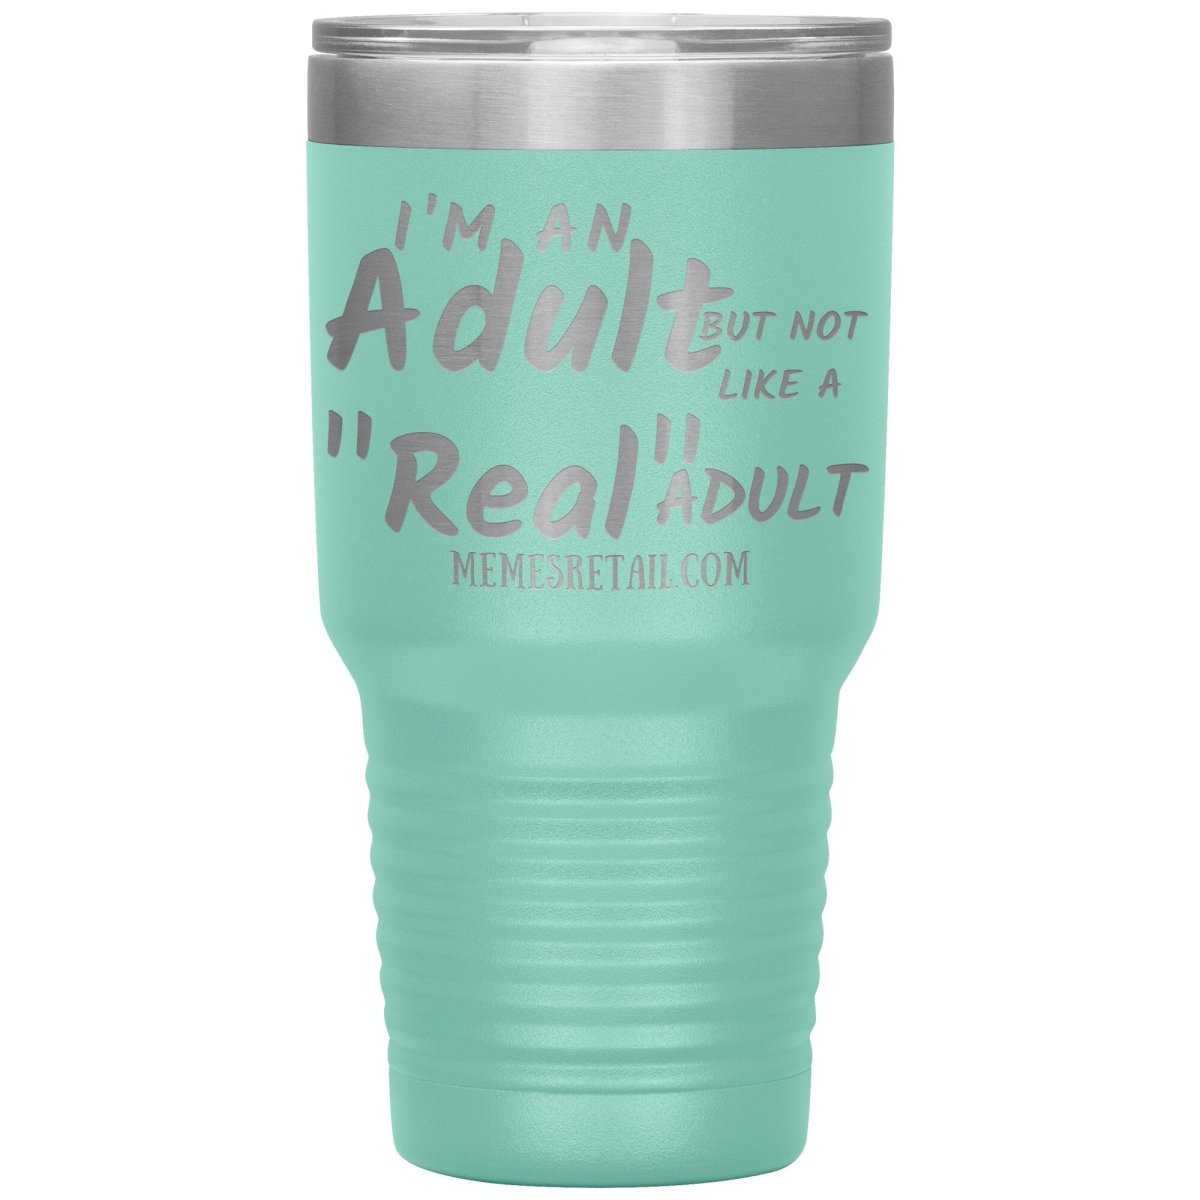 I'm an adult, but not like a "real" adult Tumblers, 30oz Insulated Tumbler / Teal - MemesRetail.com